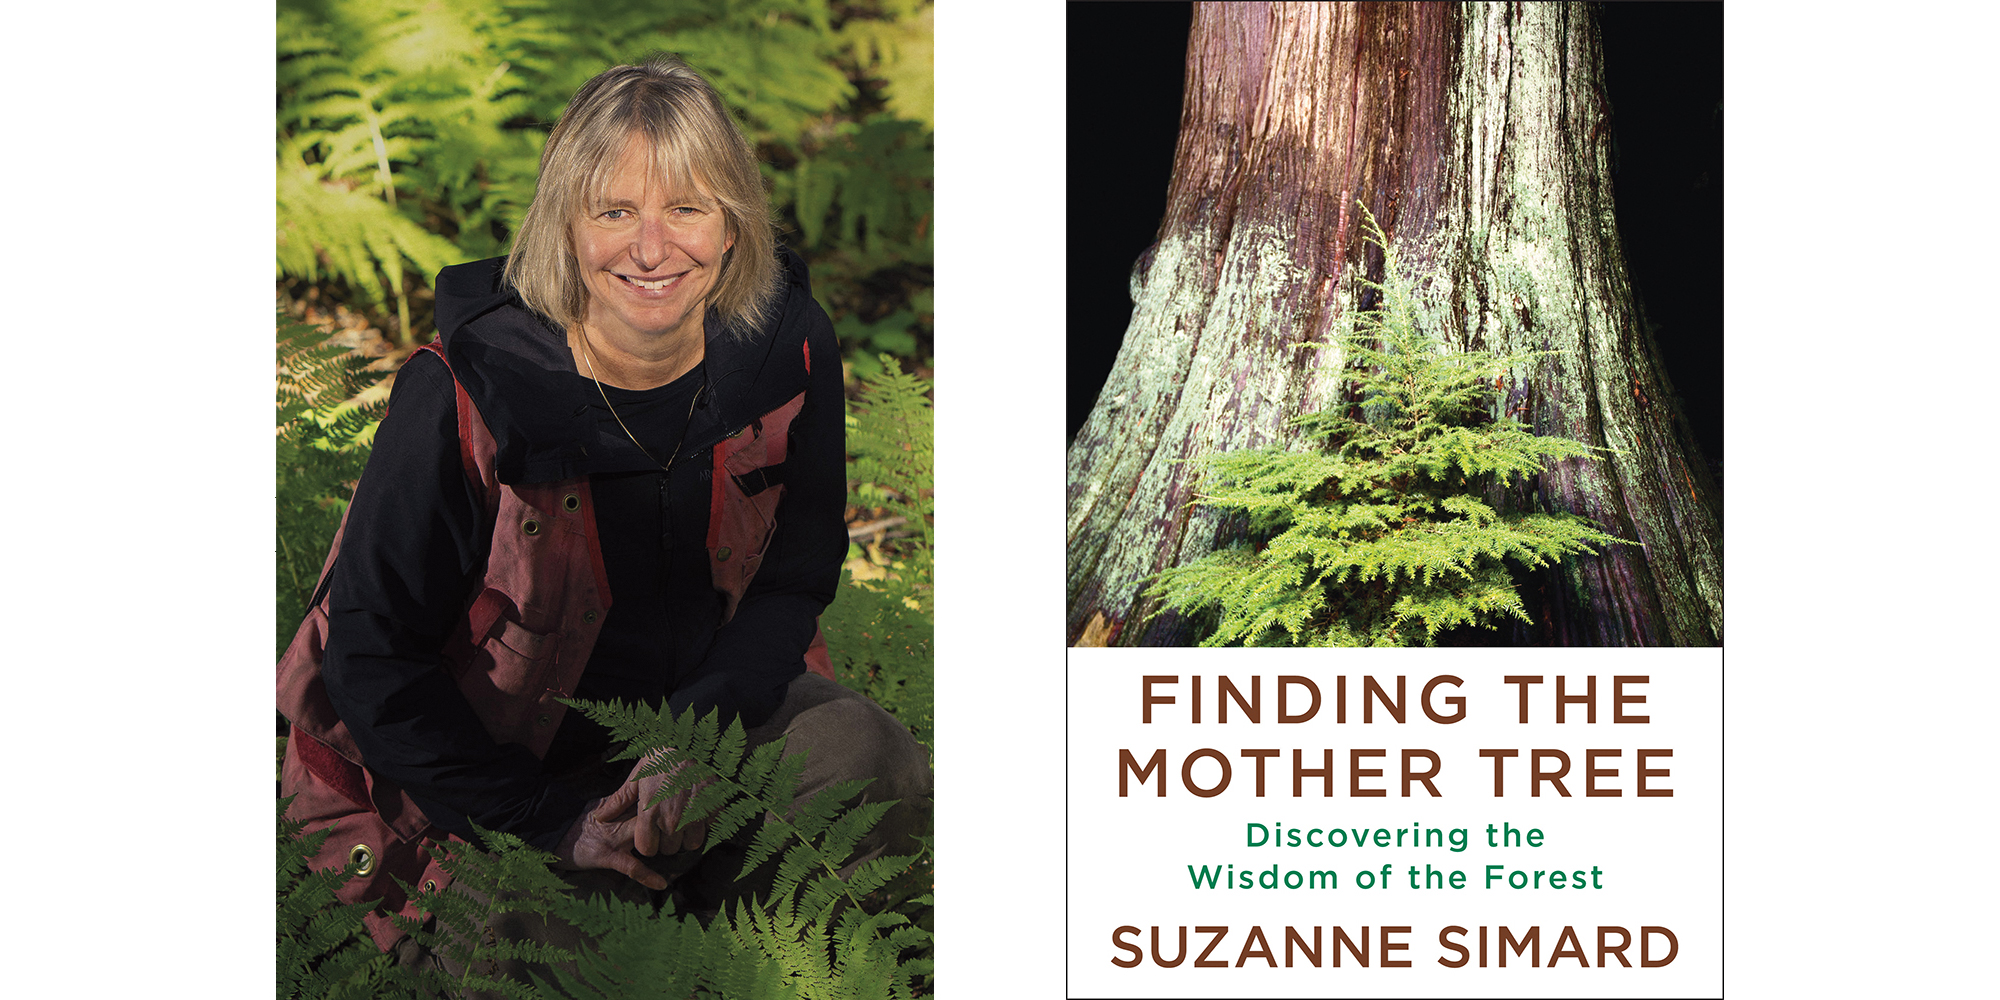 The cover of Suzanne Simard's Finding the Mother Tree with a photo of the author